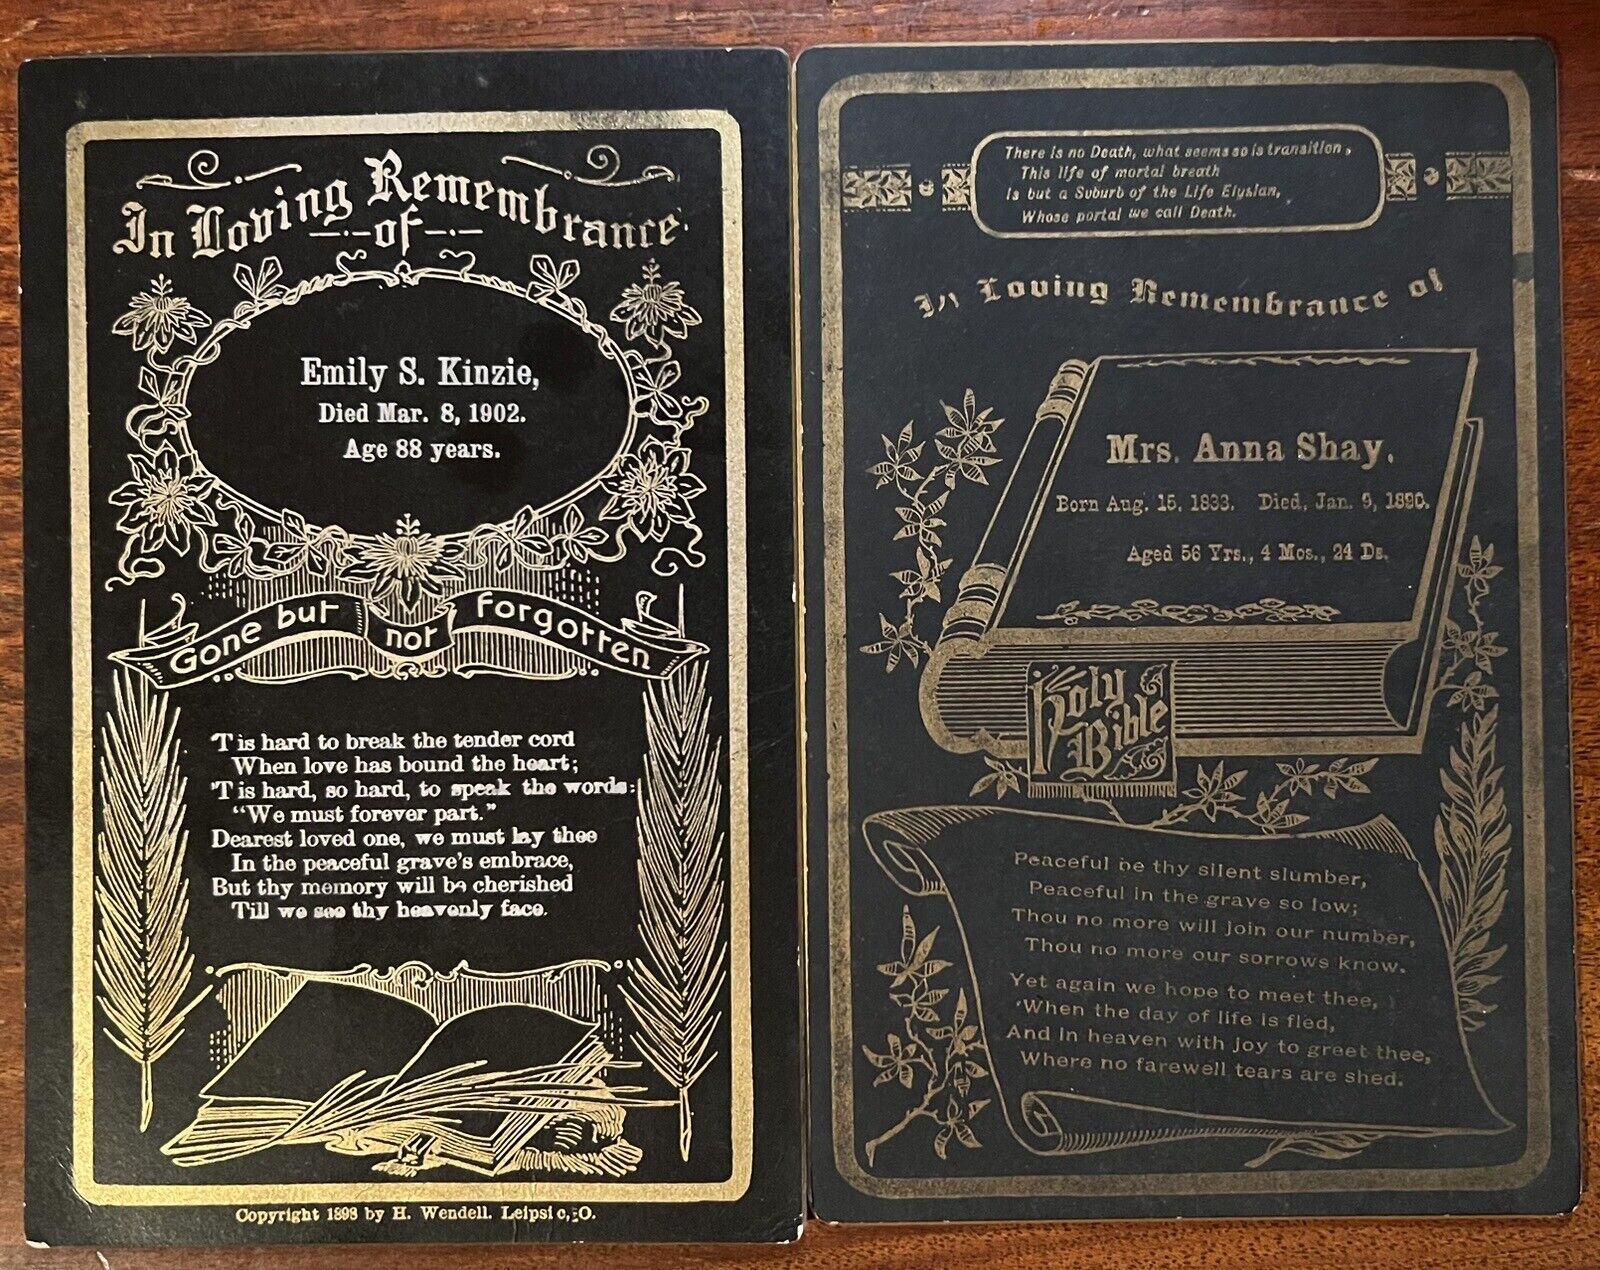 ATQ Victorian Mourning Remembrance Cards Gilded 1890 Anna Shay & 1902 E. Kinzie